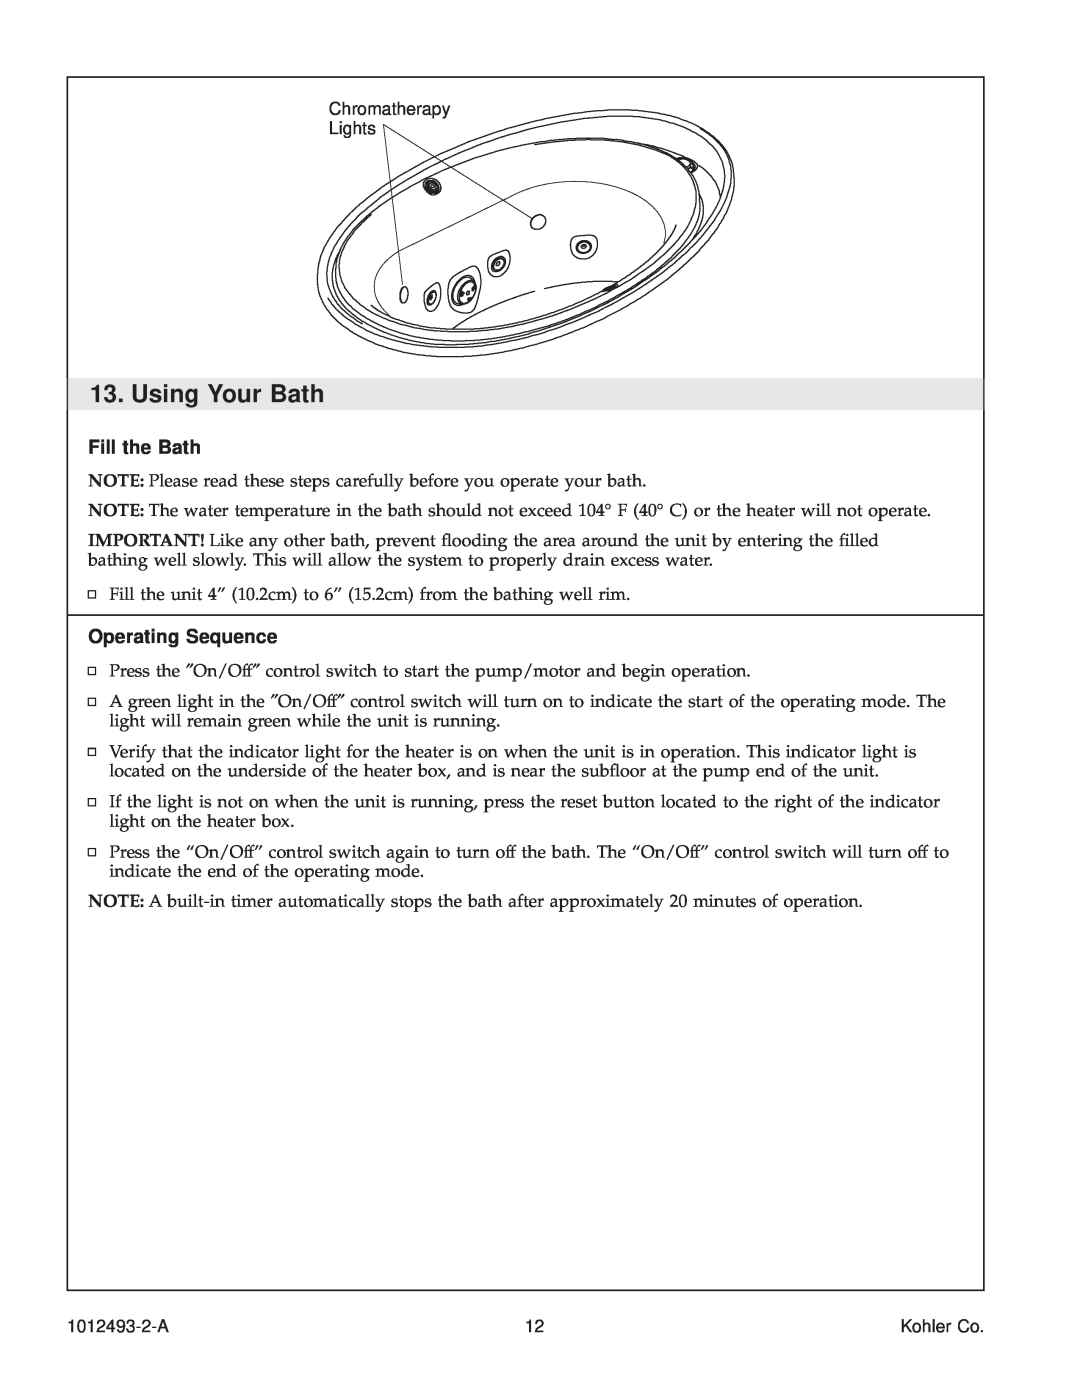 Kohler K-1191-RC, K1191-R, K1191-LC manual Using Your Bath, Fill the Bath, Operating Sequence 